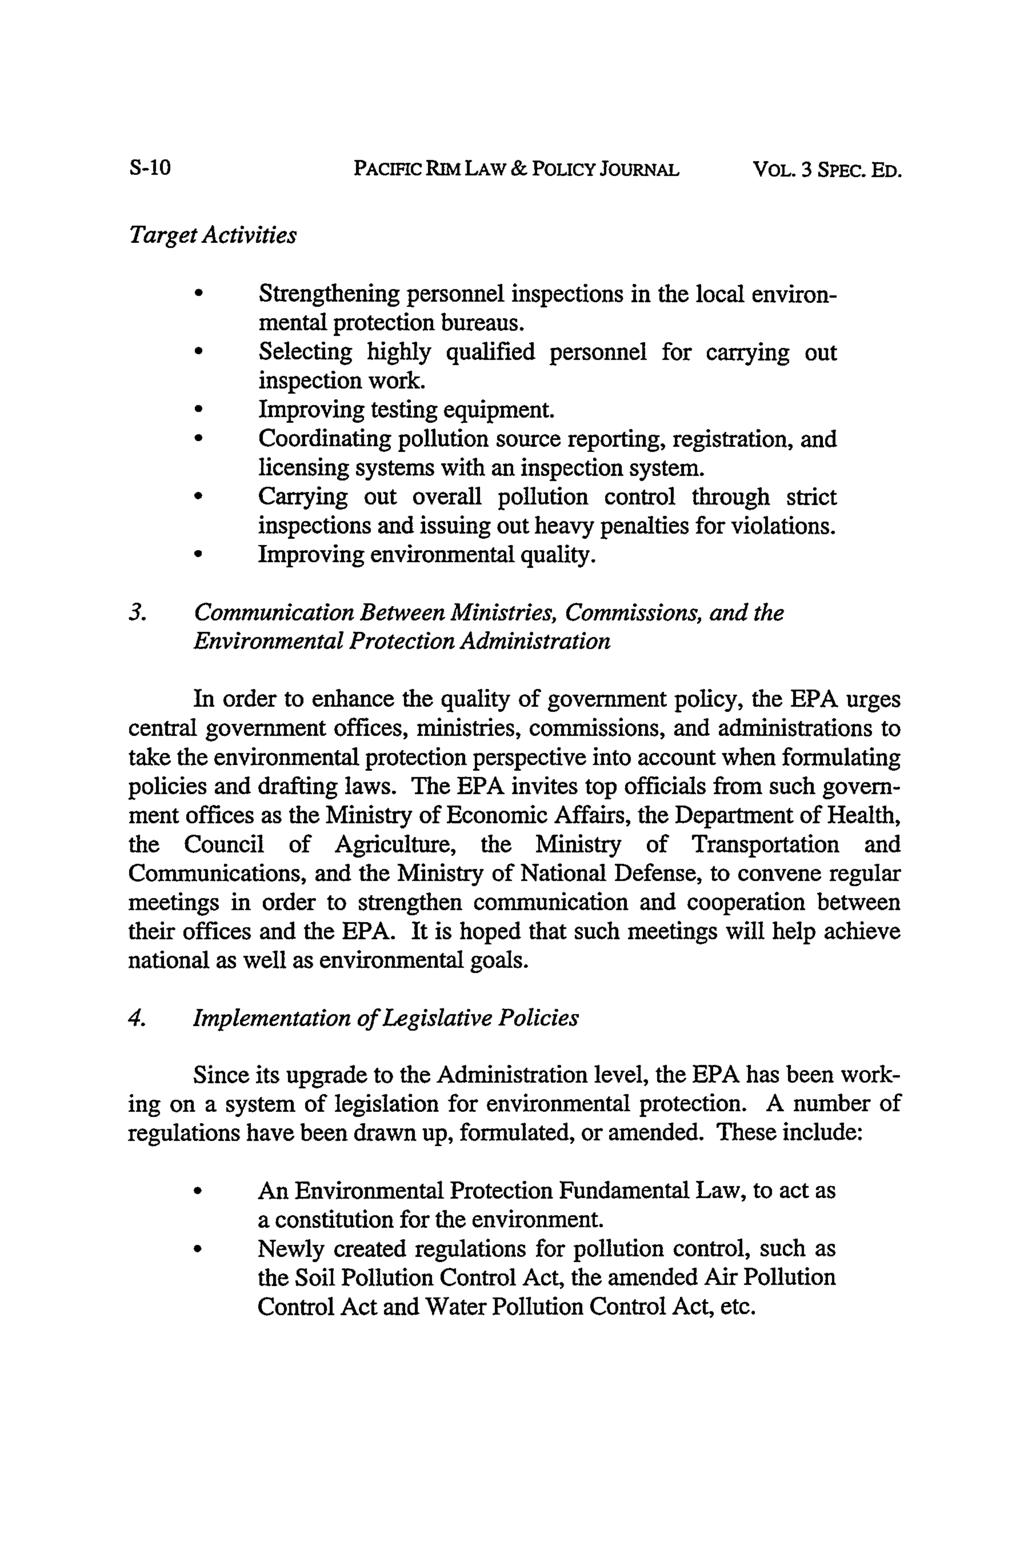 S-10 PACIFIC RIM LAW & POLICY JOURNAL VOL. 3 SPEc. ED. Target Activities " Strengthening personnel inspections in the local environmental protection bureaus.